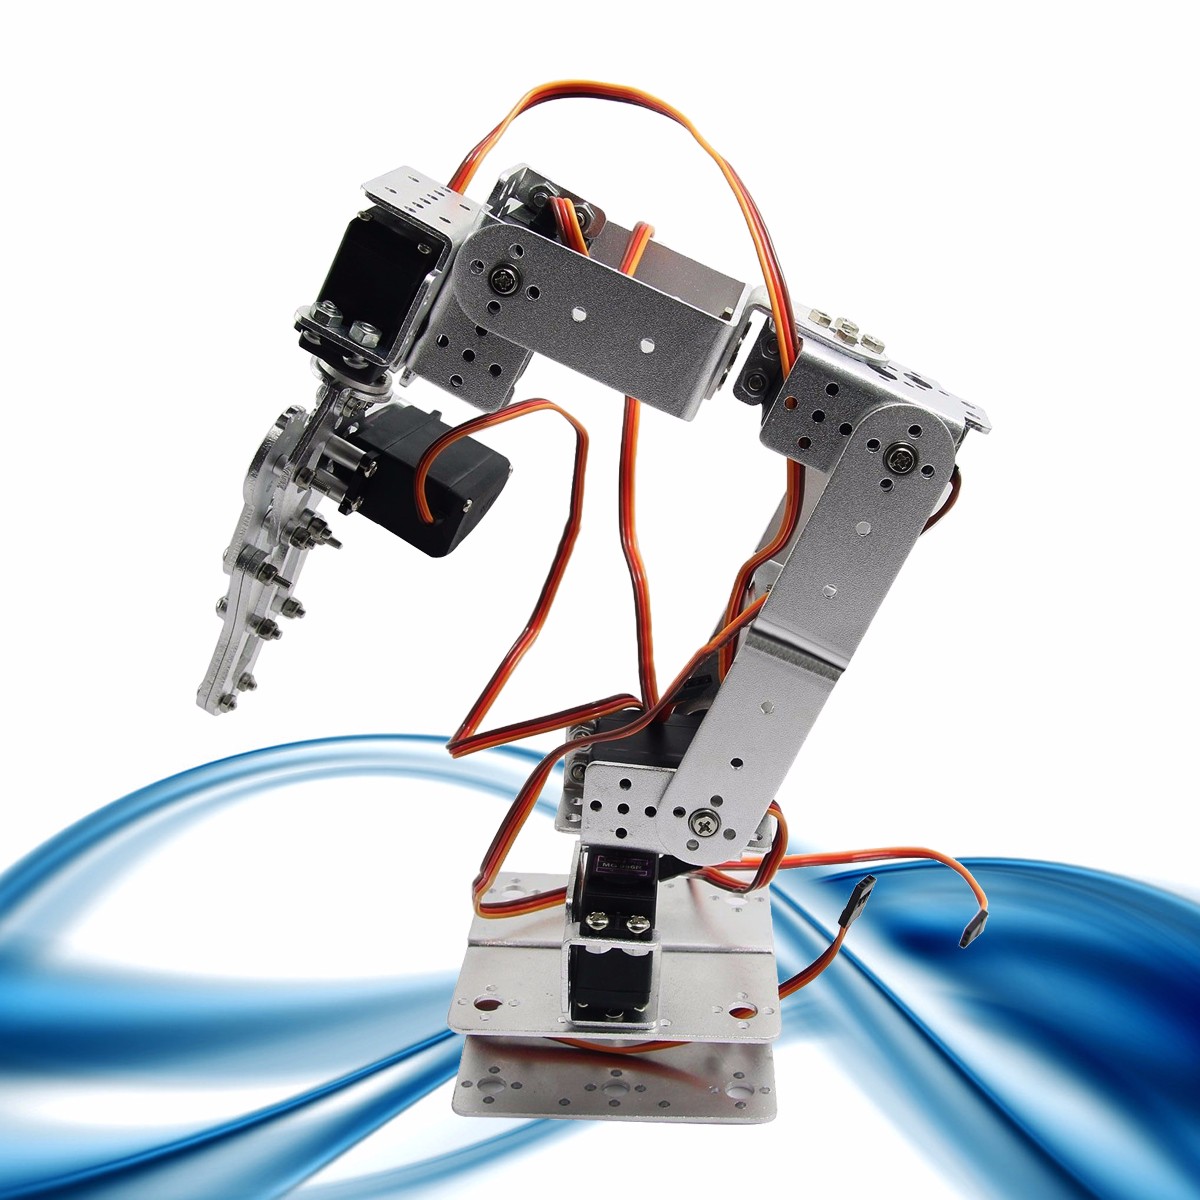 ROT2U 6DOF Aluminium Robot Arm Clamp Claw Mount Kit With Servos For Arduino-Silver 11